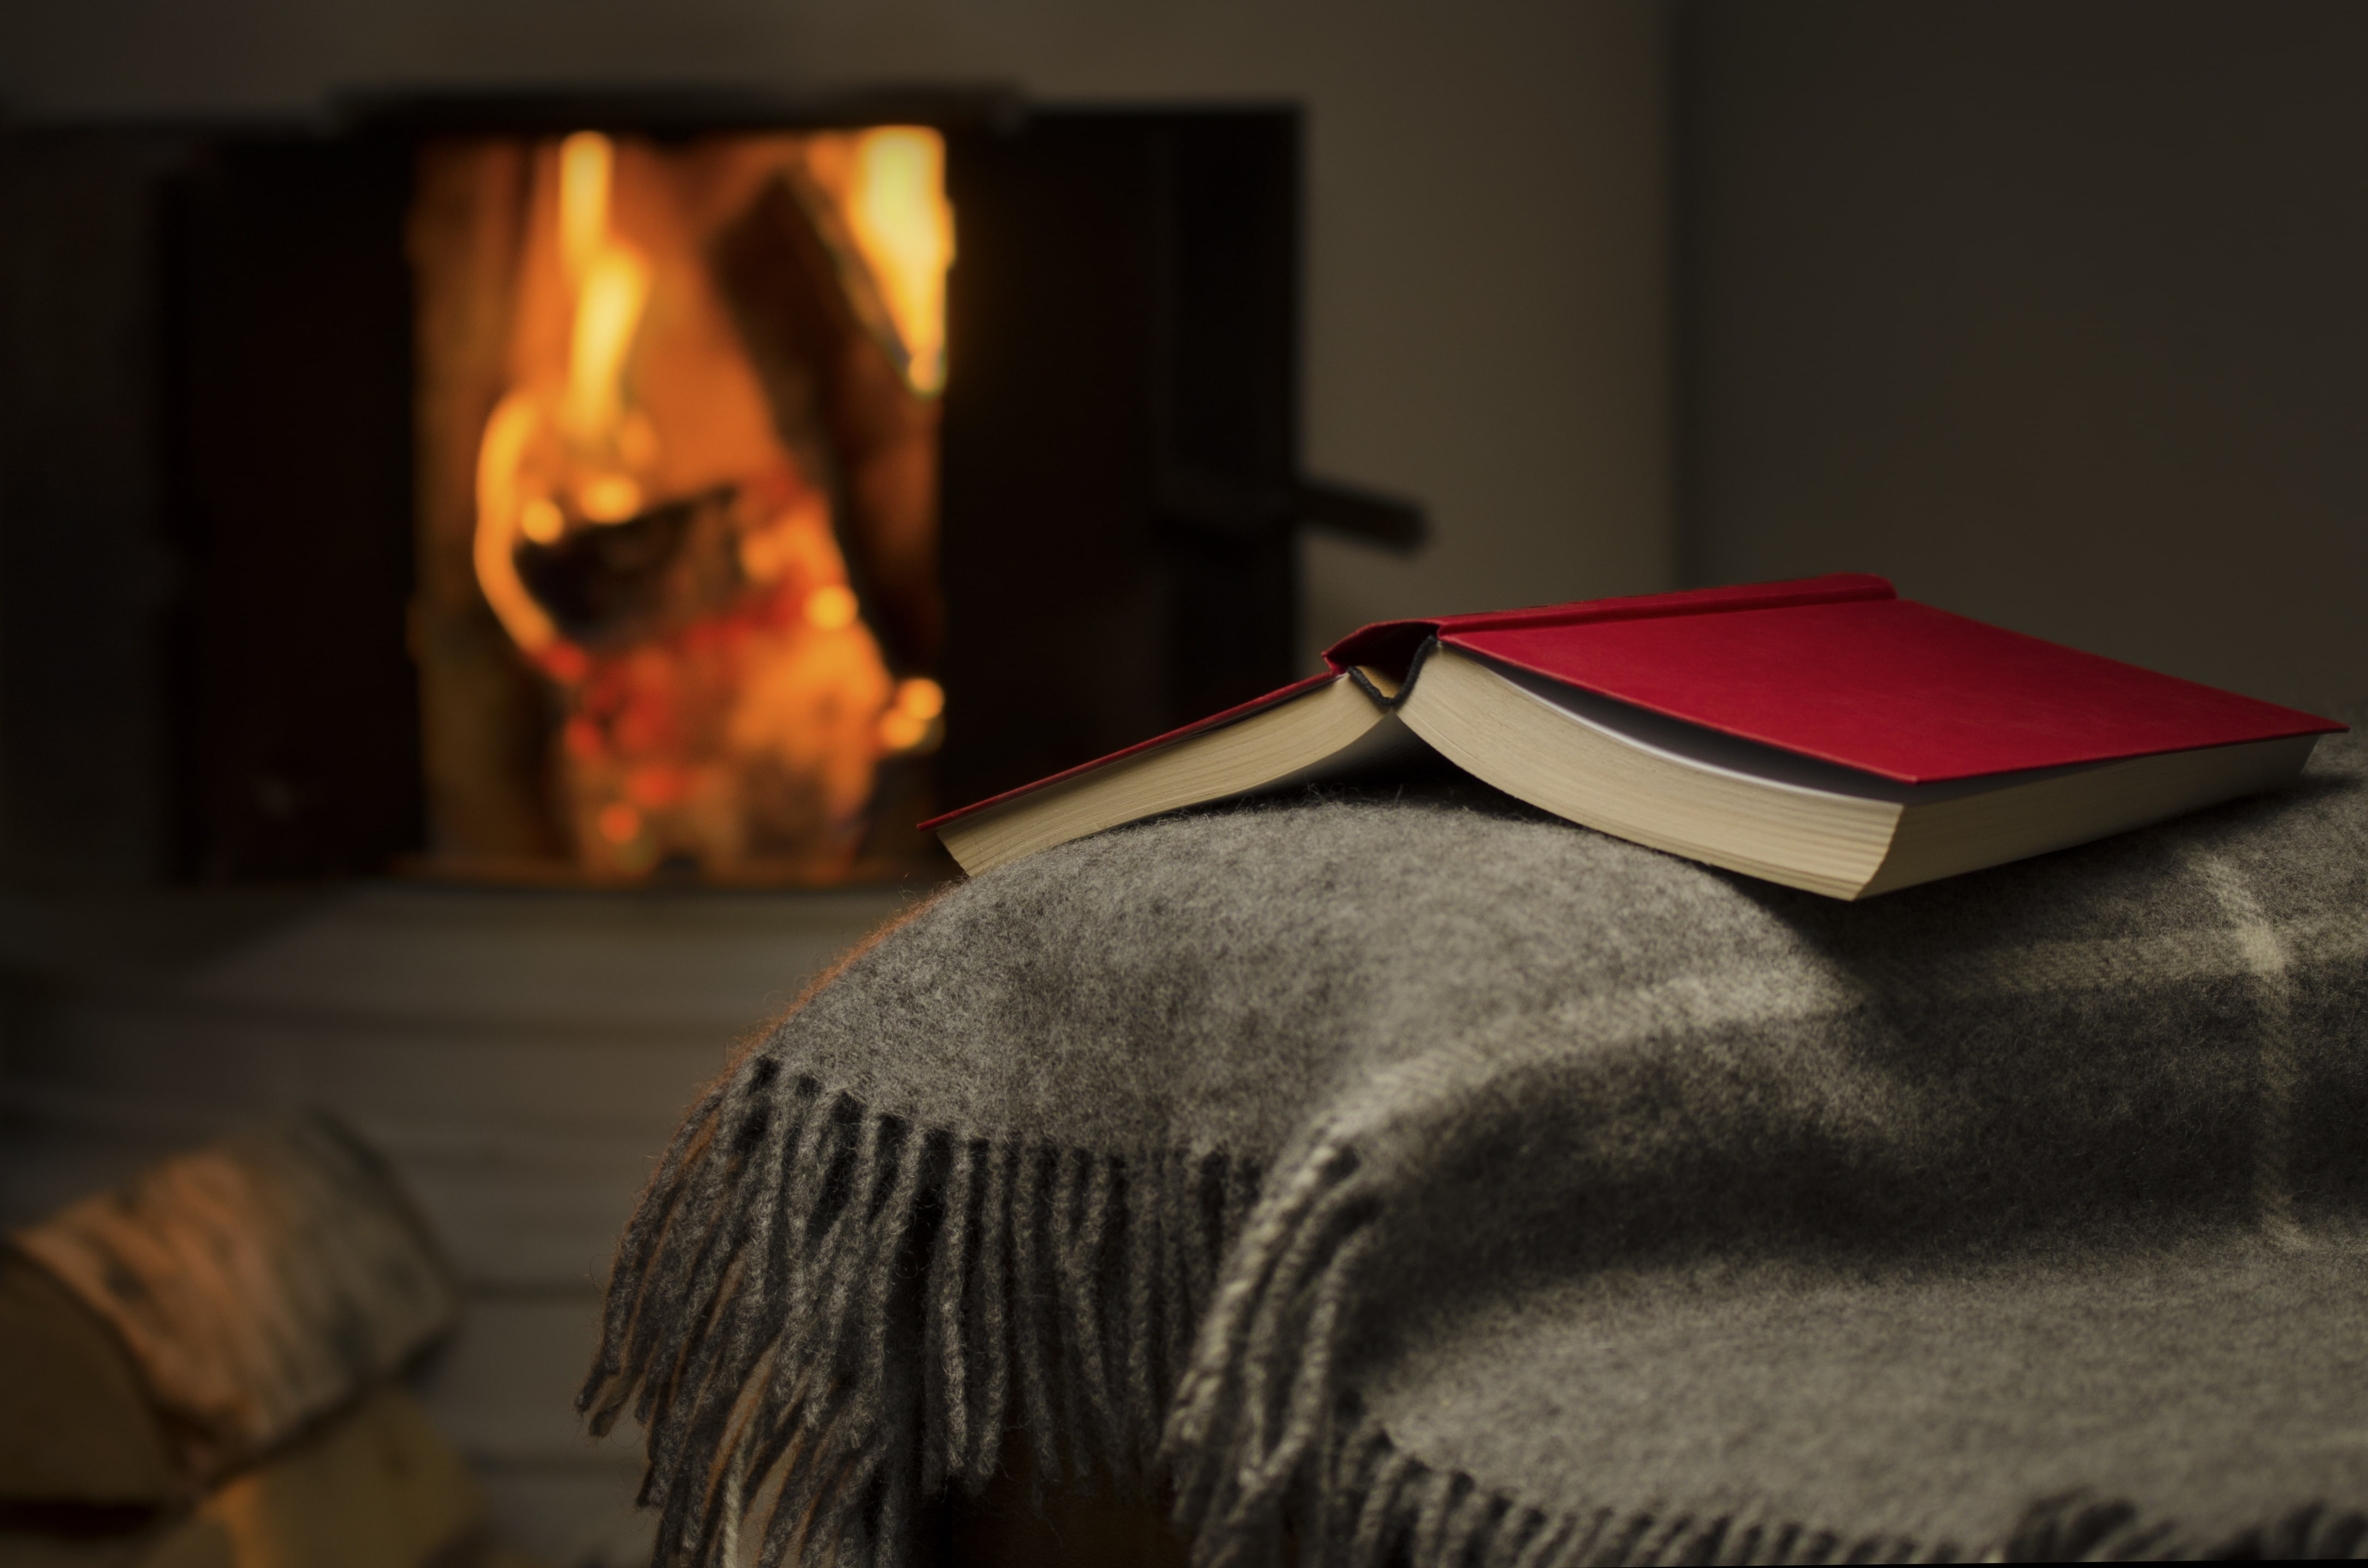 red book, fire, fireplace, plaid, fire - Natural Phenomenon, heat - Temperature